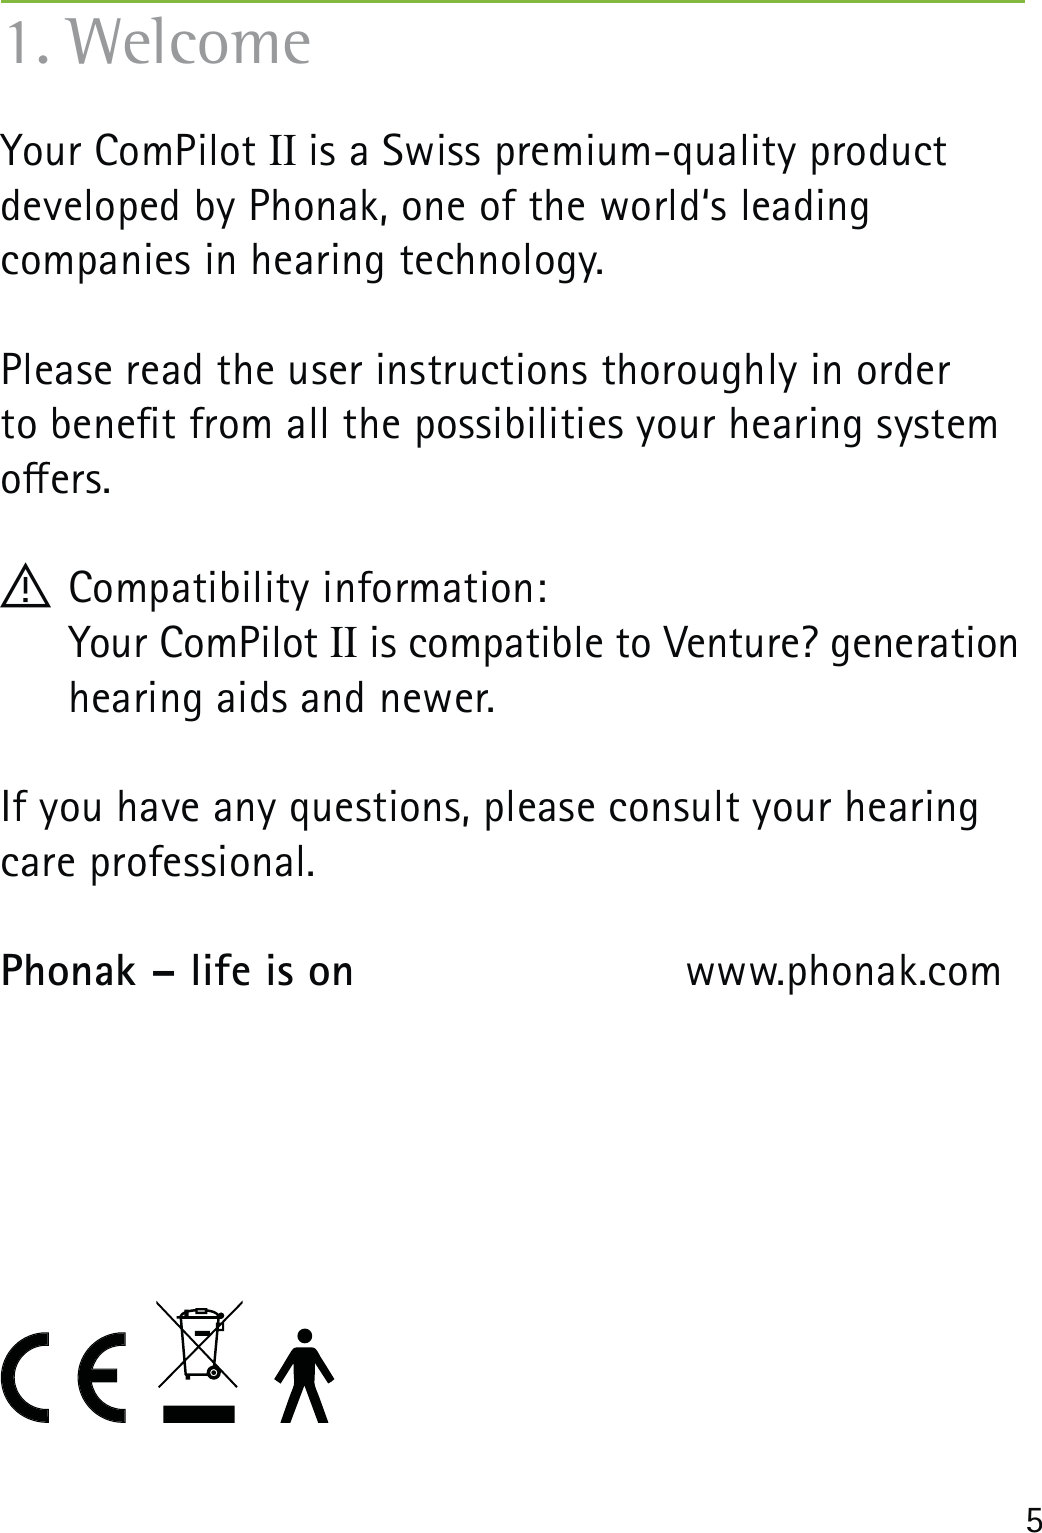 5Your ComPilot II is a Swiss premium-quality product  developed by Phonak, one of the world‘s leading  companies in hearing technology.Please read the user instructions thoroughly in order  to benet from all the possibilities your hearing system oers.! Compatibility information:    Your ComPilot II is compatible to Venture? generation hearing aids and newer. If you have any questions, please consult your hearing care professional.Phonak – life is on   www.phonak.com1. Welcome